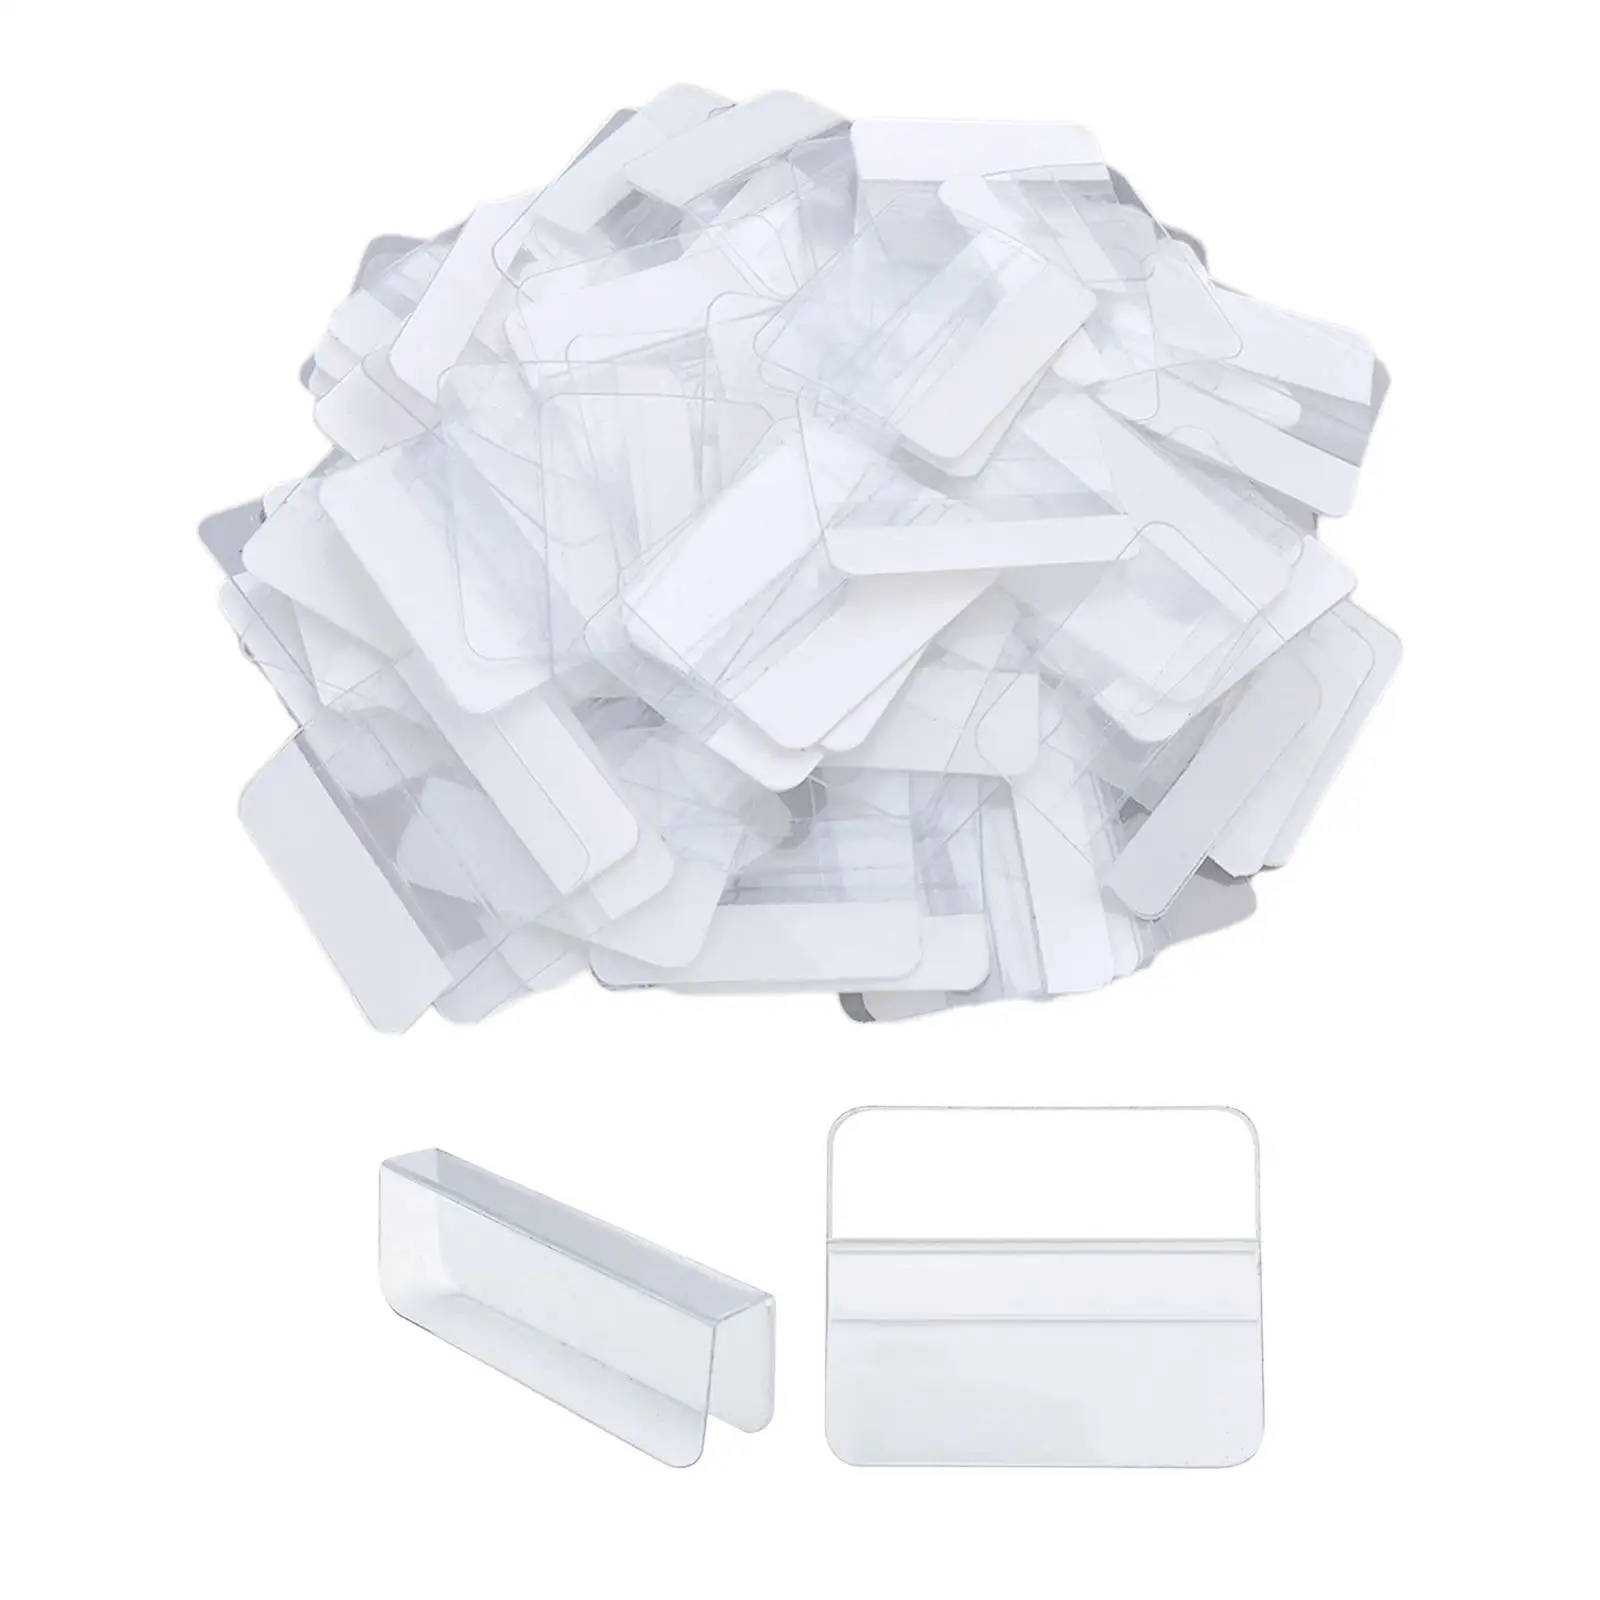 Pack of 100 pcs NUORUI Plastic Backs Lips Adhesive Adapters for Jewelry Cards 